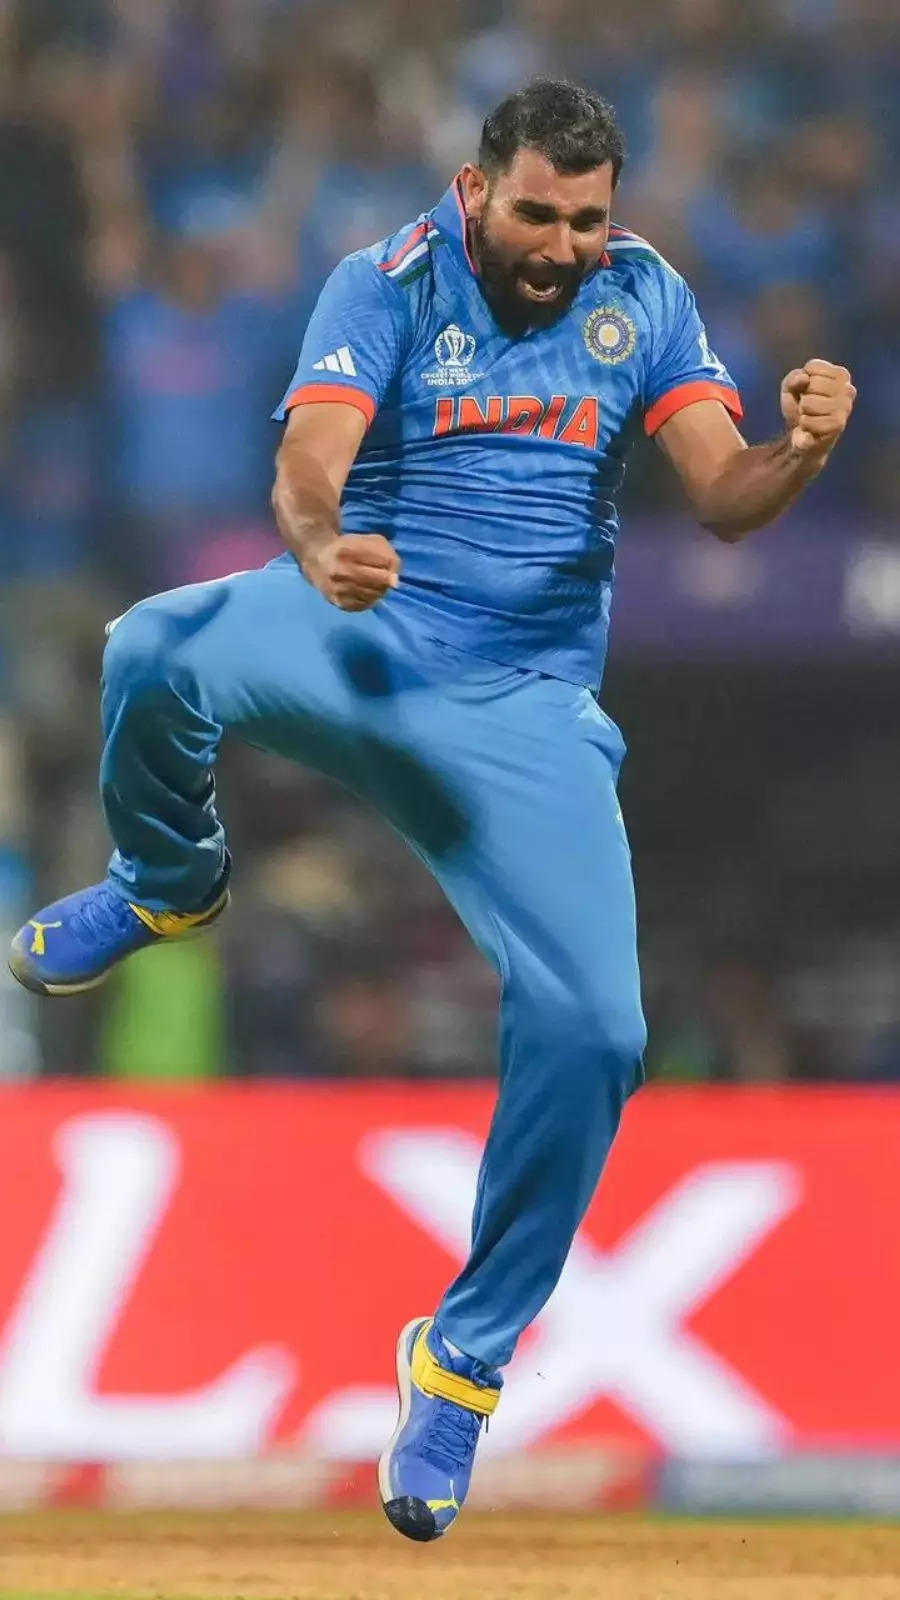 Shami only Indian to take 7 wickets in World Cup: Who are the others?